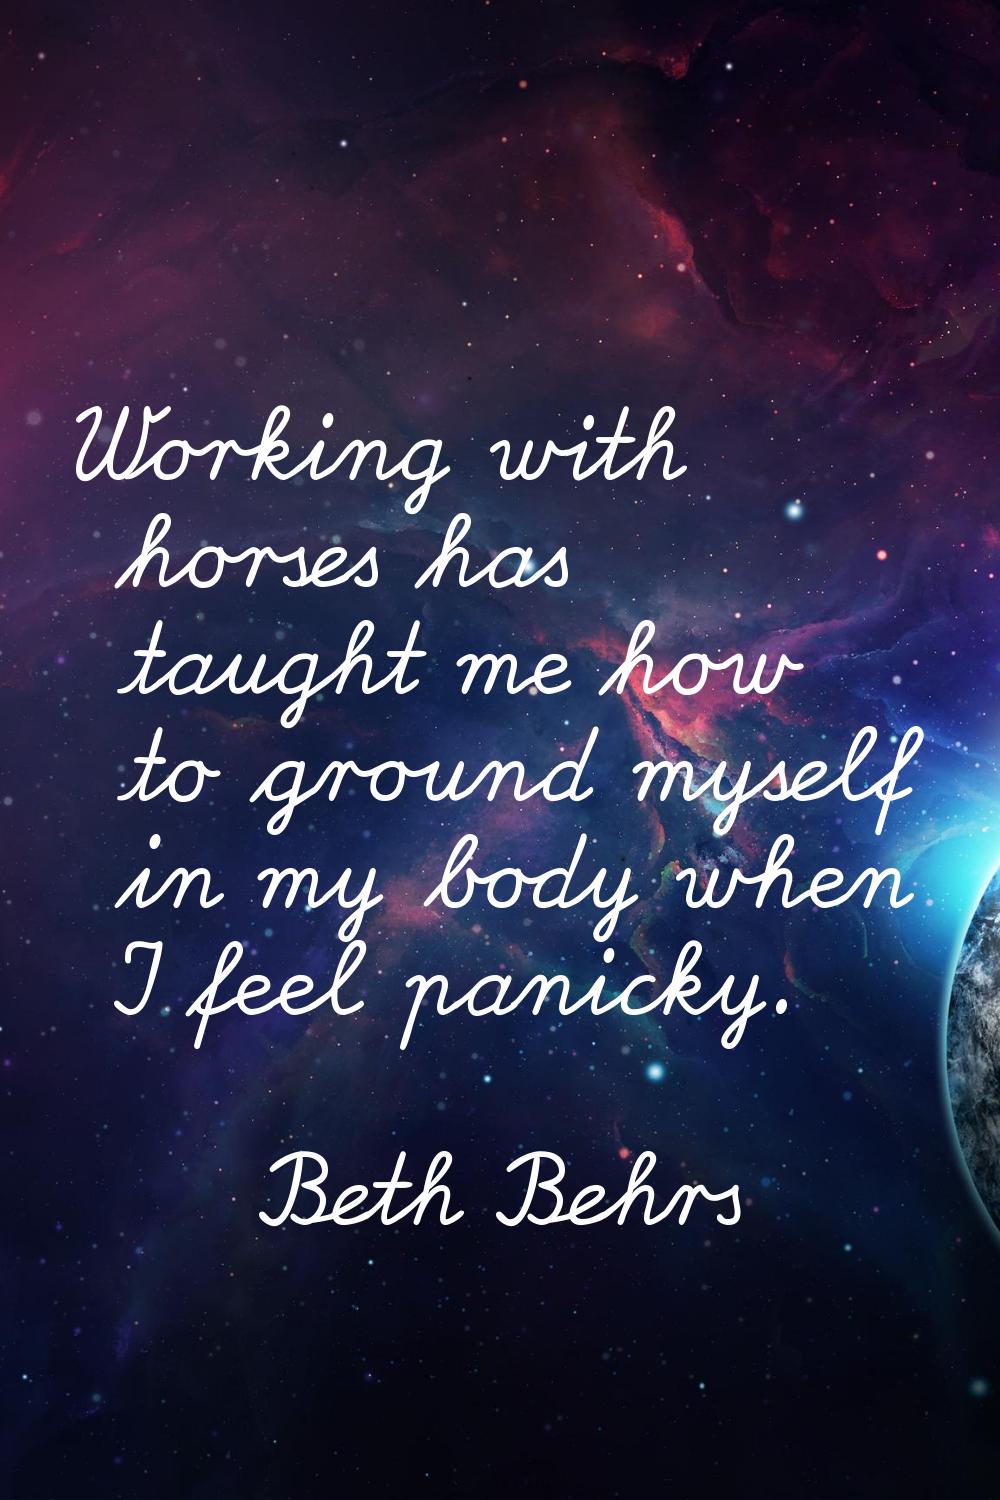 Working with horses has taught me how to ground myself in my body when I feel panicky.